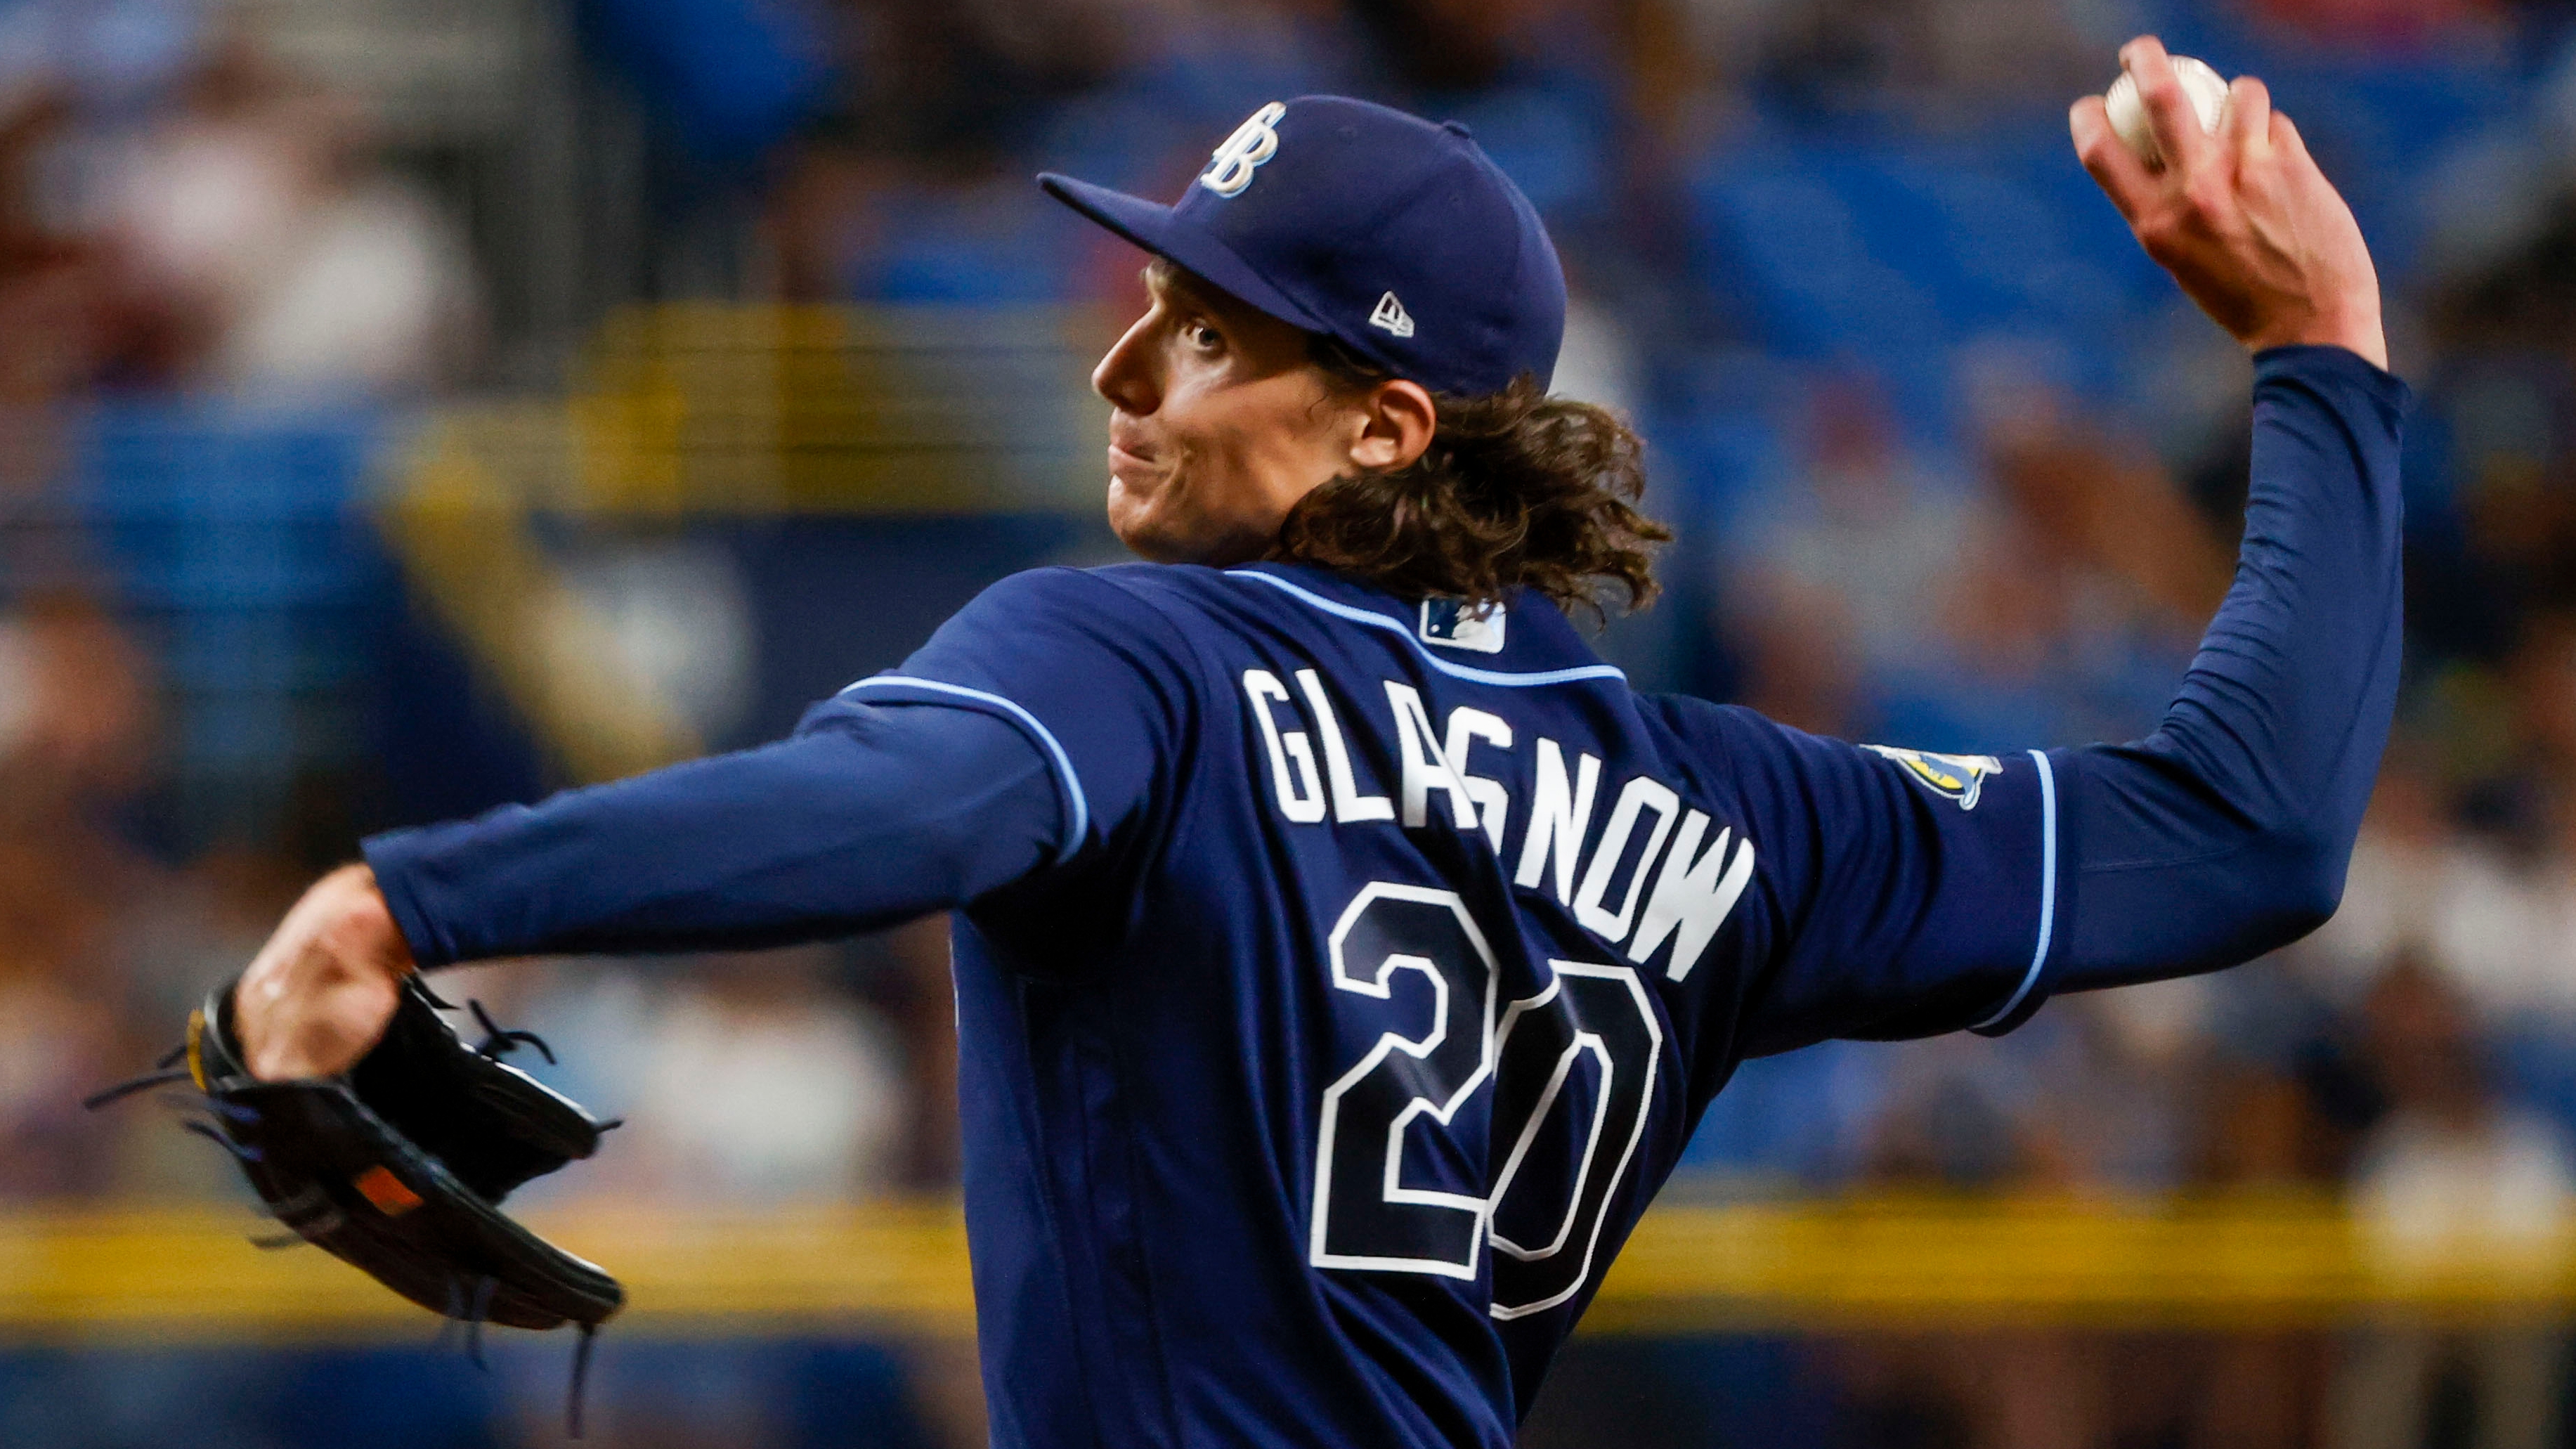 Former Rays pitcher Tyler Glasnow joins 'dream team' Dodgers